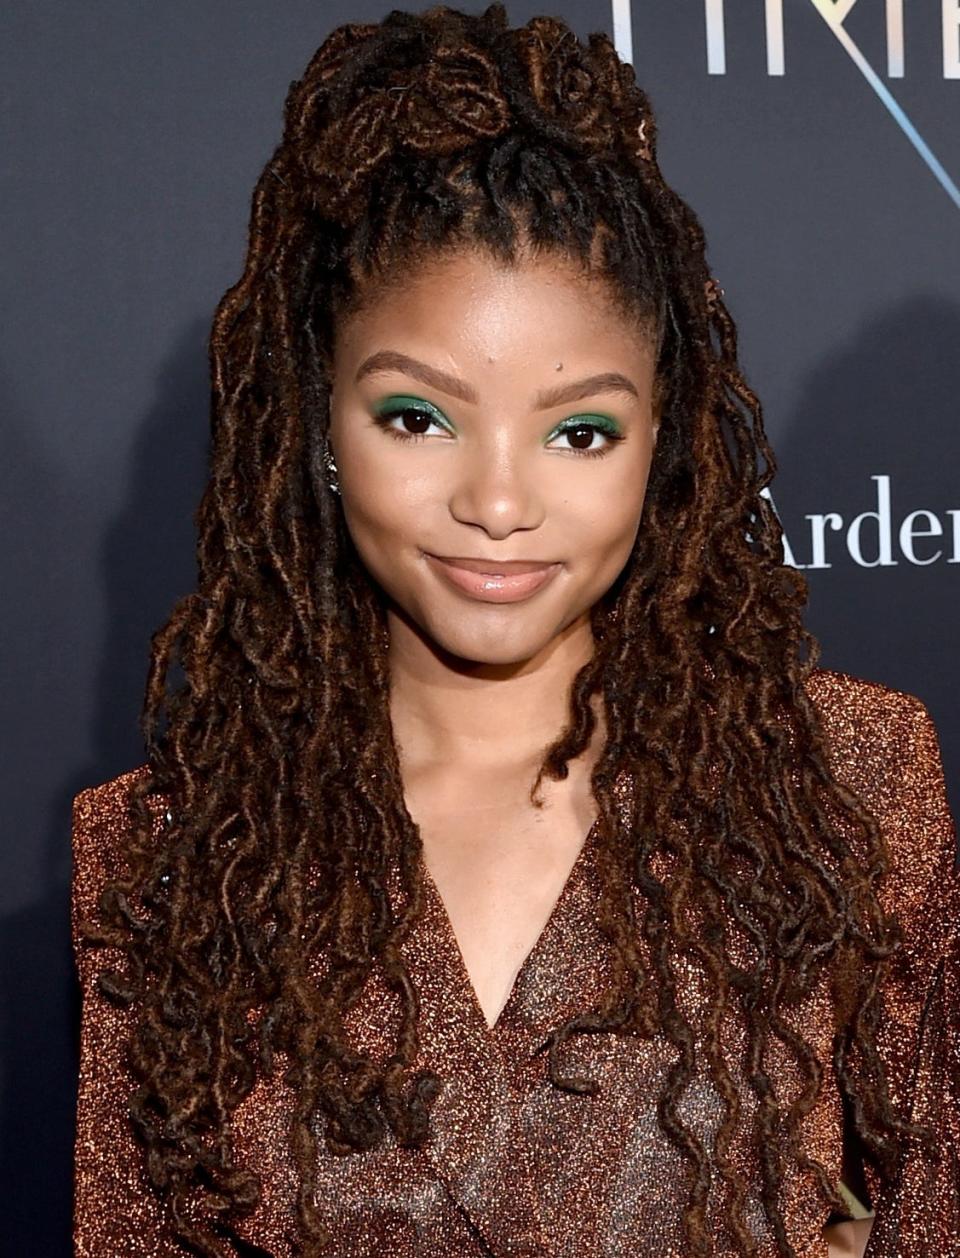 Halle Bailey plays Ariel in "The Little Mermaid" live-action movie.